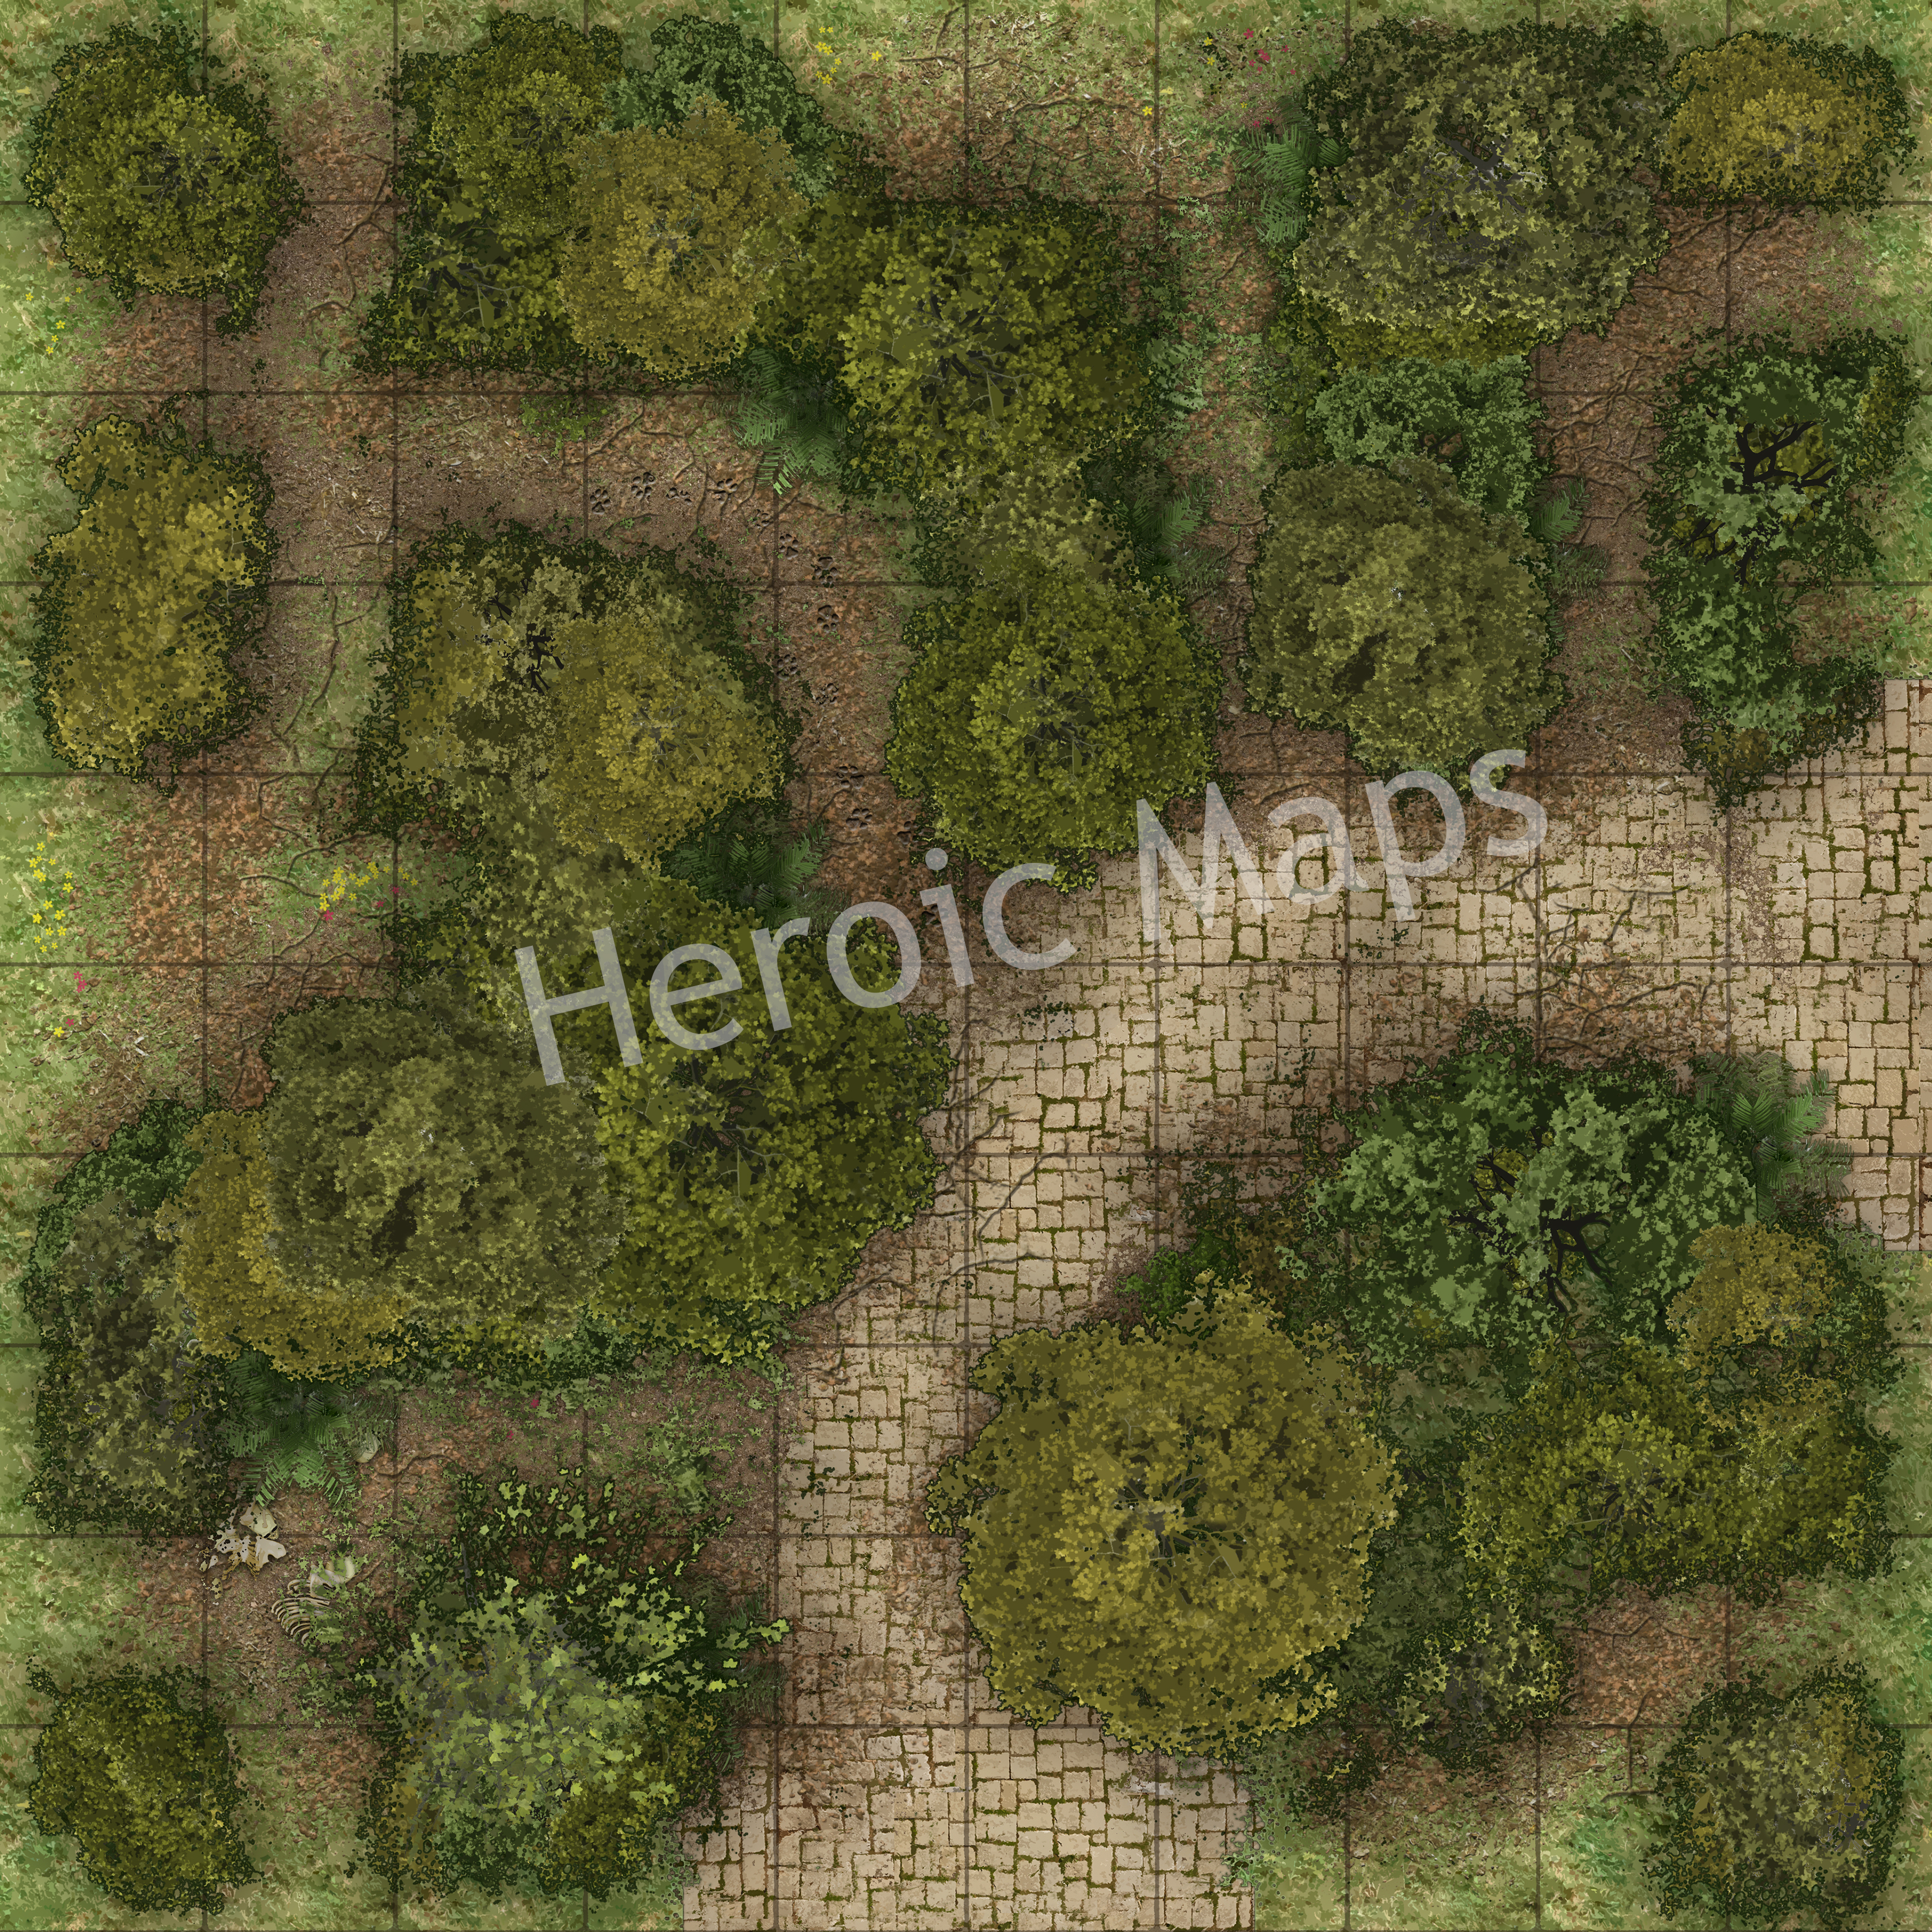 Heroic Maps - Geomorphs: Forest Roads - Heroic Maps | Wilderness ...